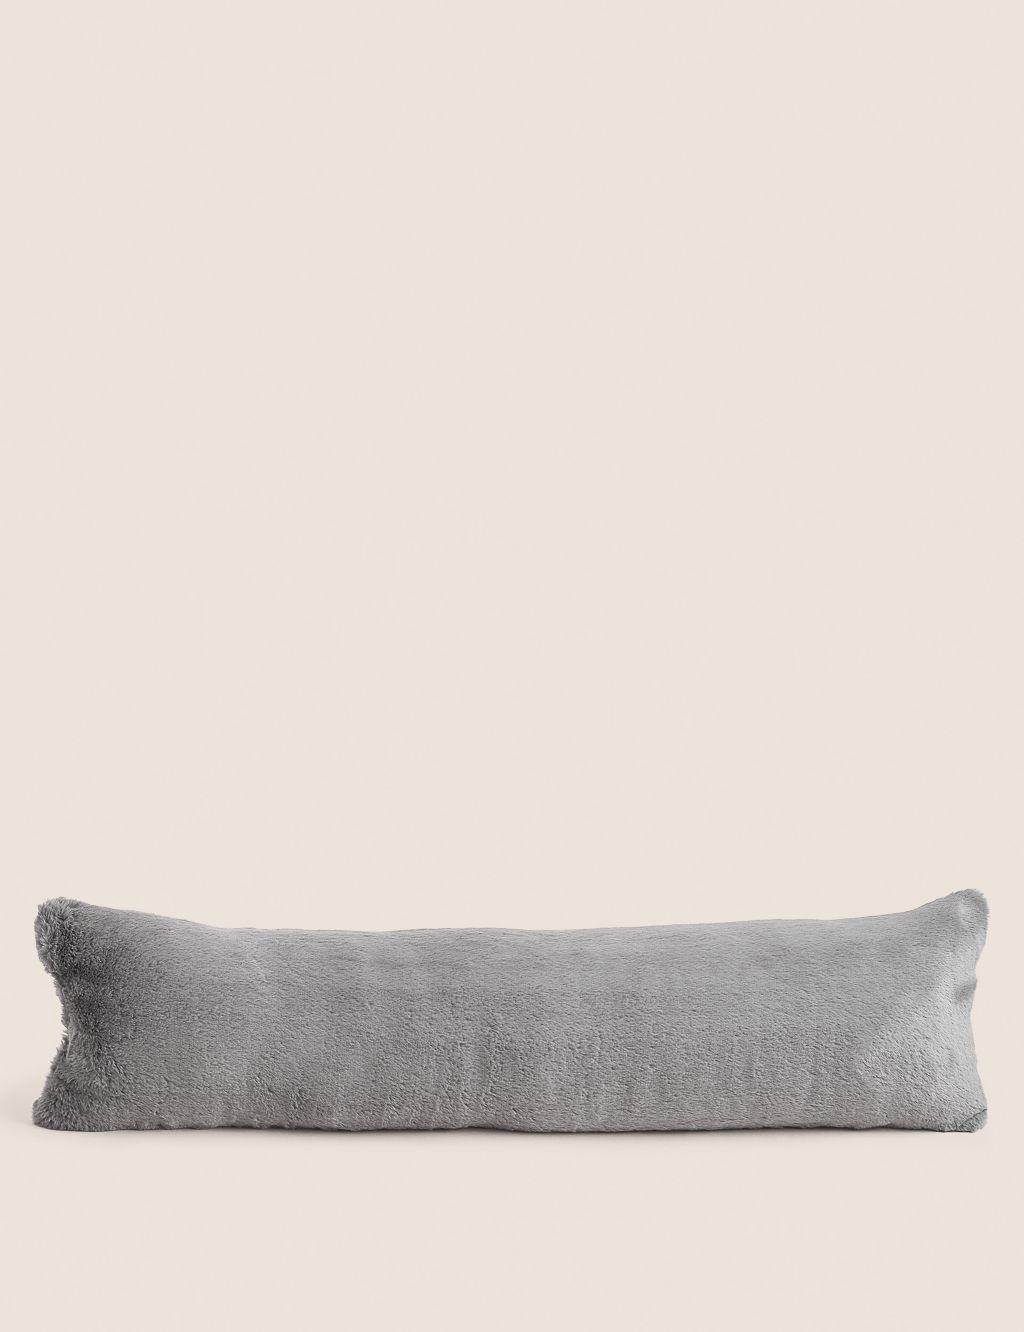 Supersoft Faux Fur Draught Excluder image 1